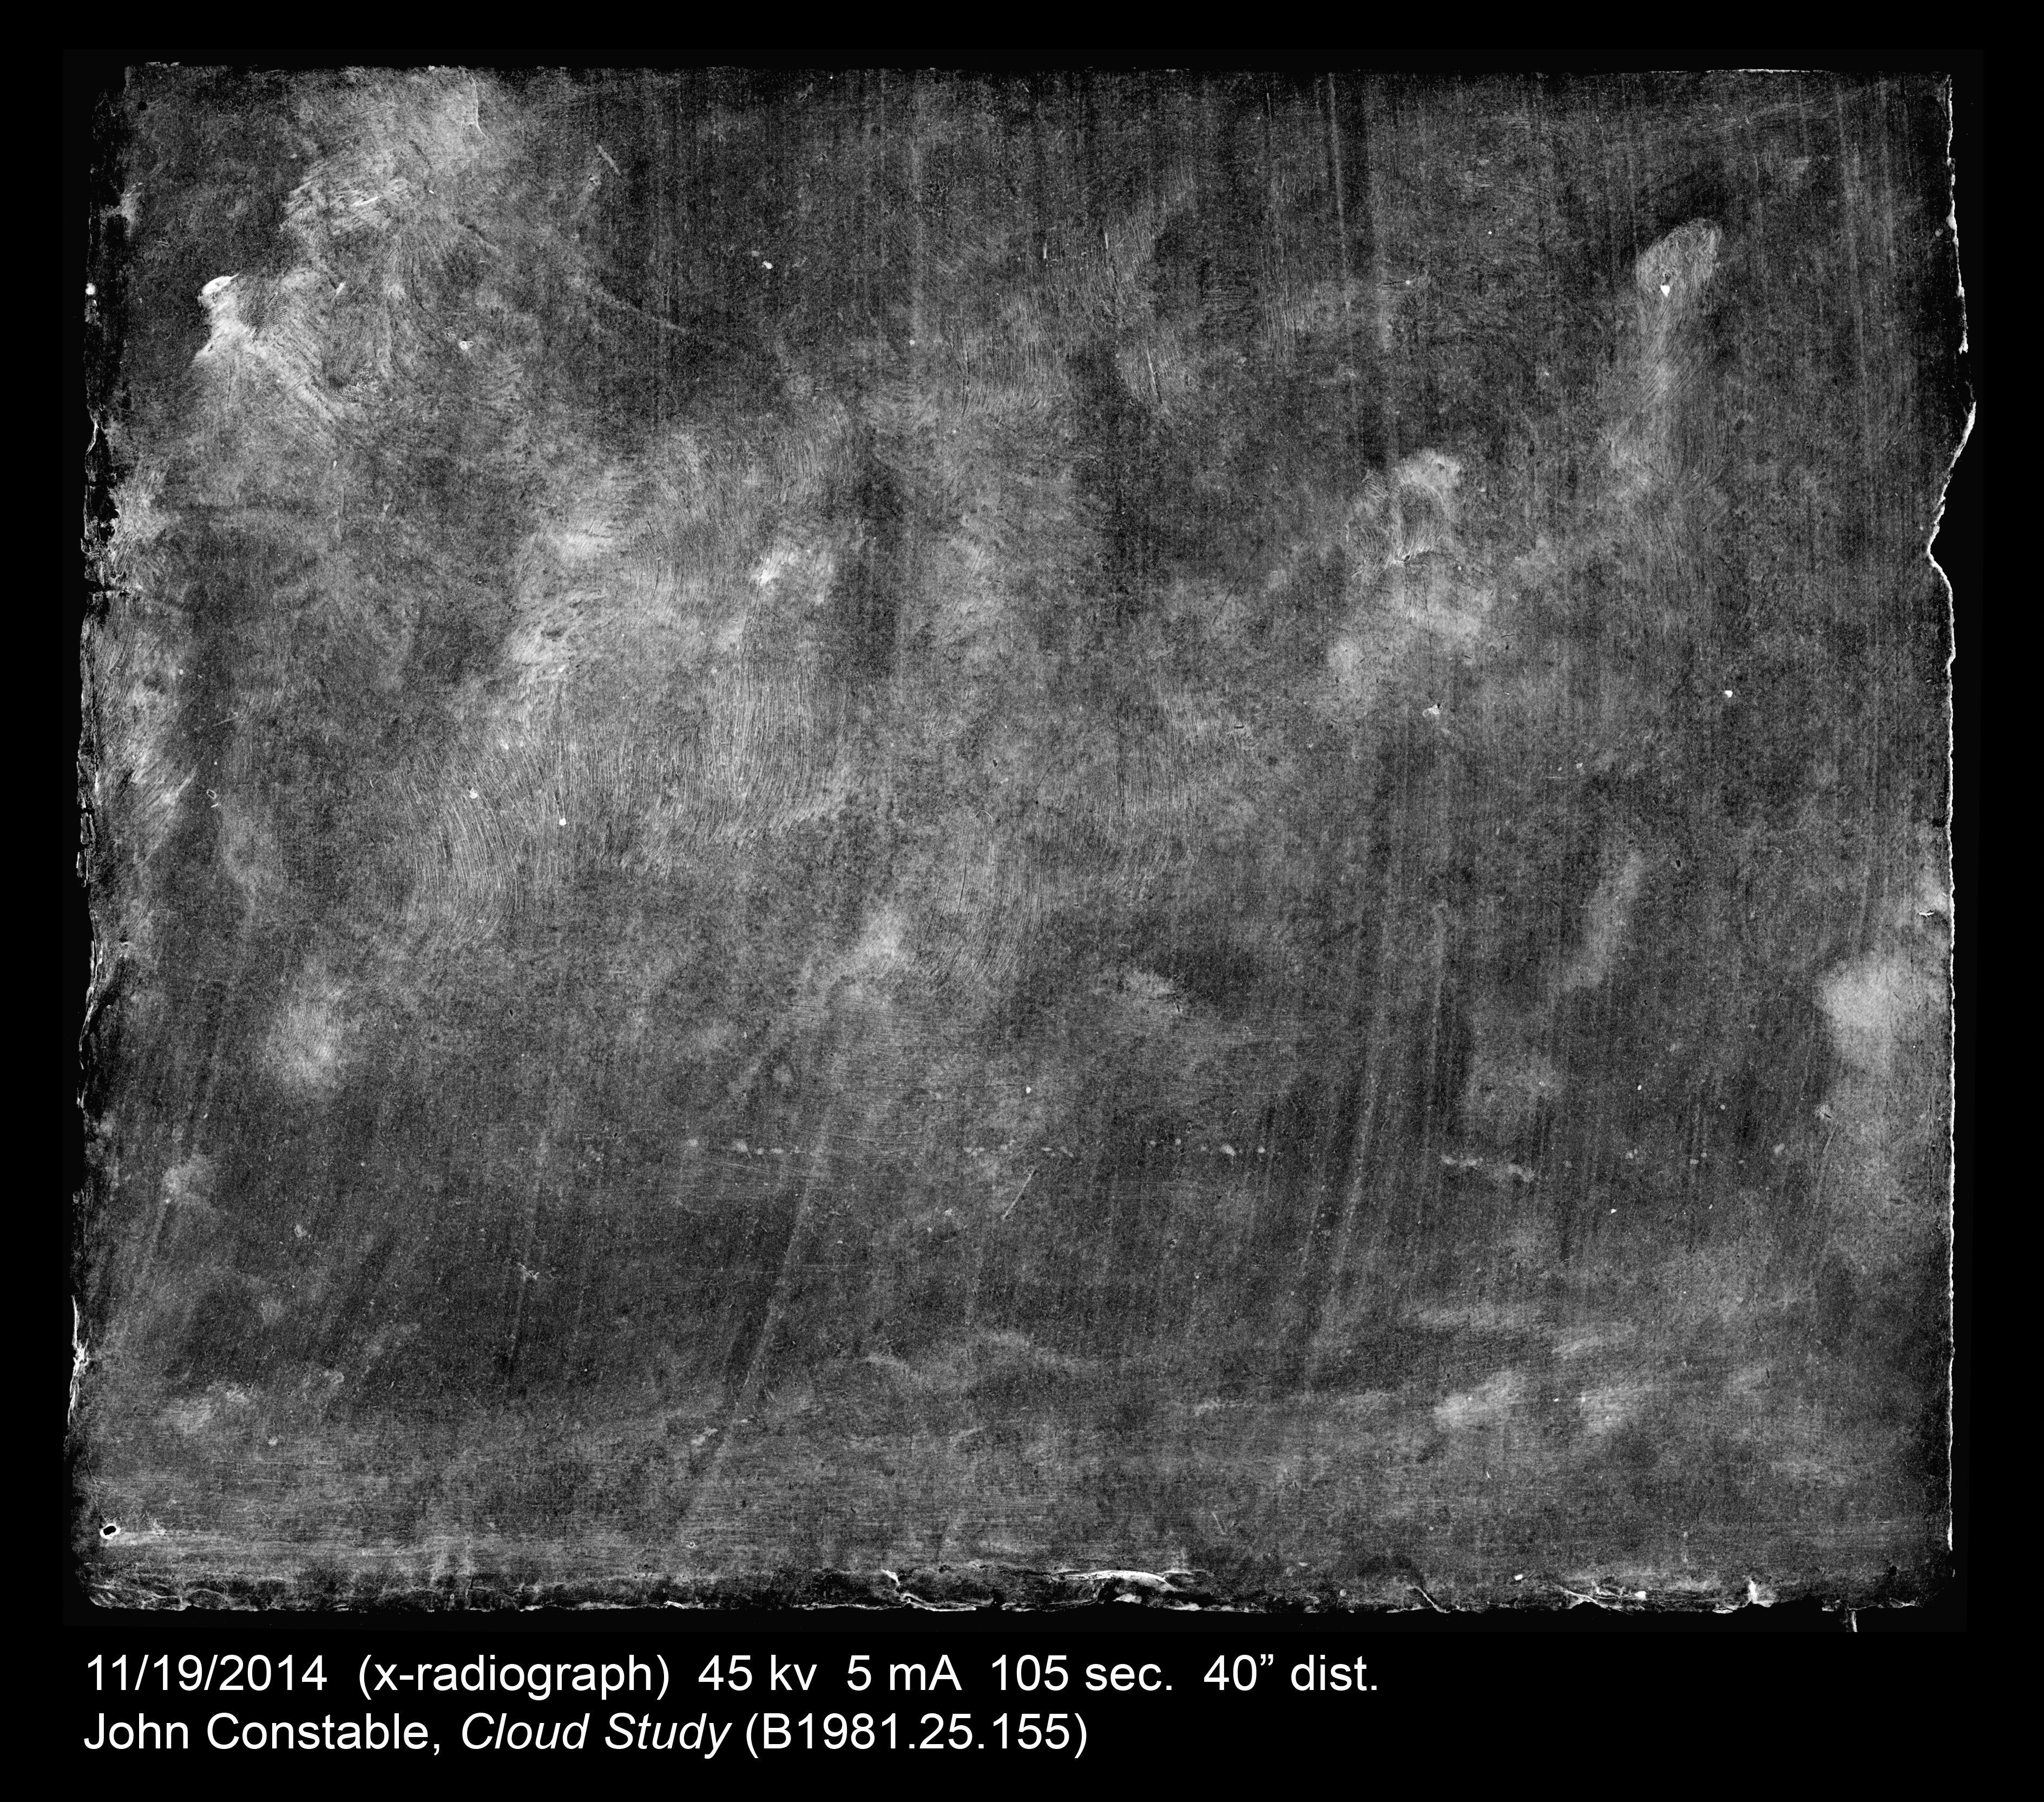 A black and white x-ray image of a skyscape sketch; vertical brushy marks cover the image